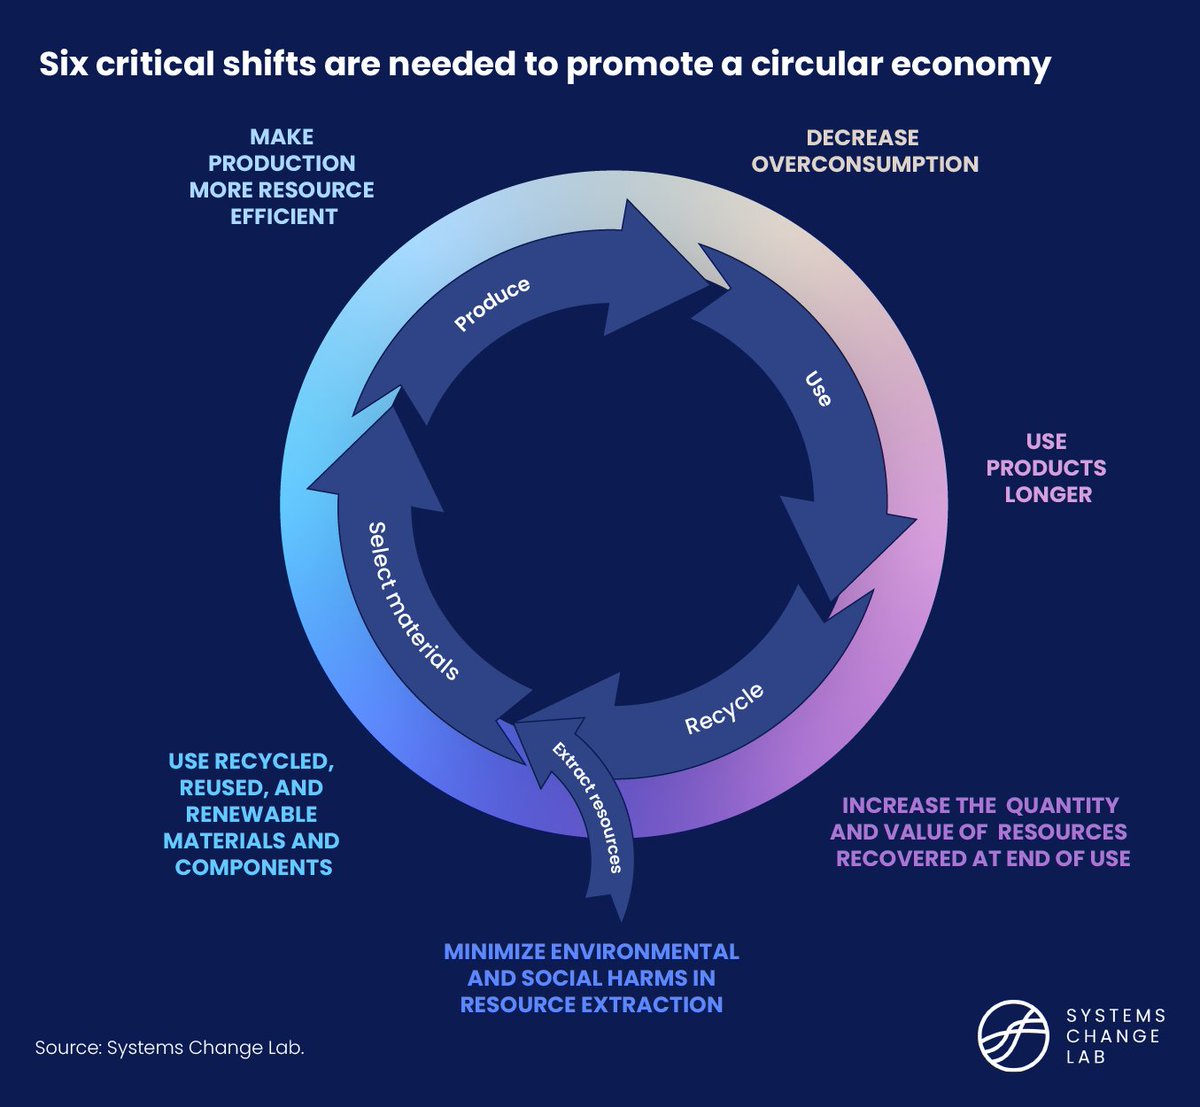 🔄 Extending the life of our products is essential for the #CircularEconomy—a key step is making repairing items more accessible, desirable and affordable for consumers. More from #SystemsChangeLab: bit.ly/3TGdu4Q